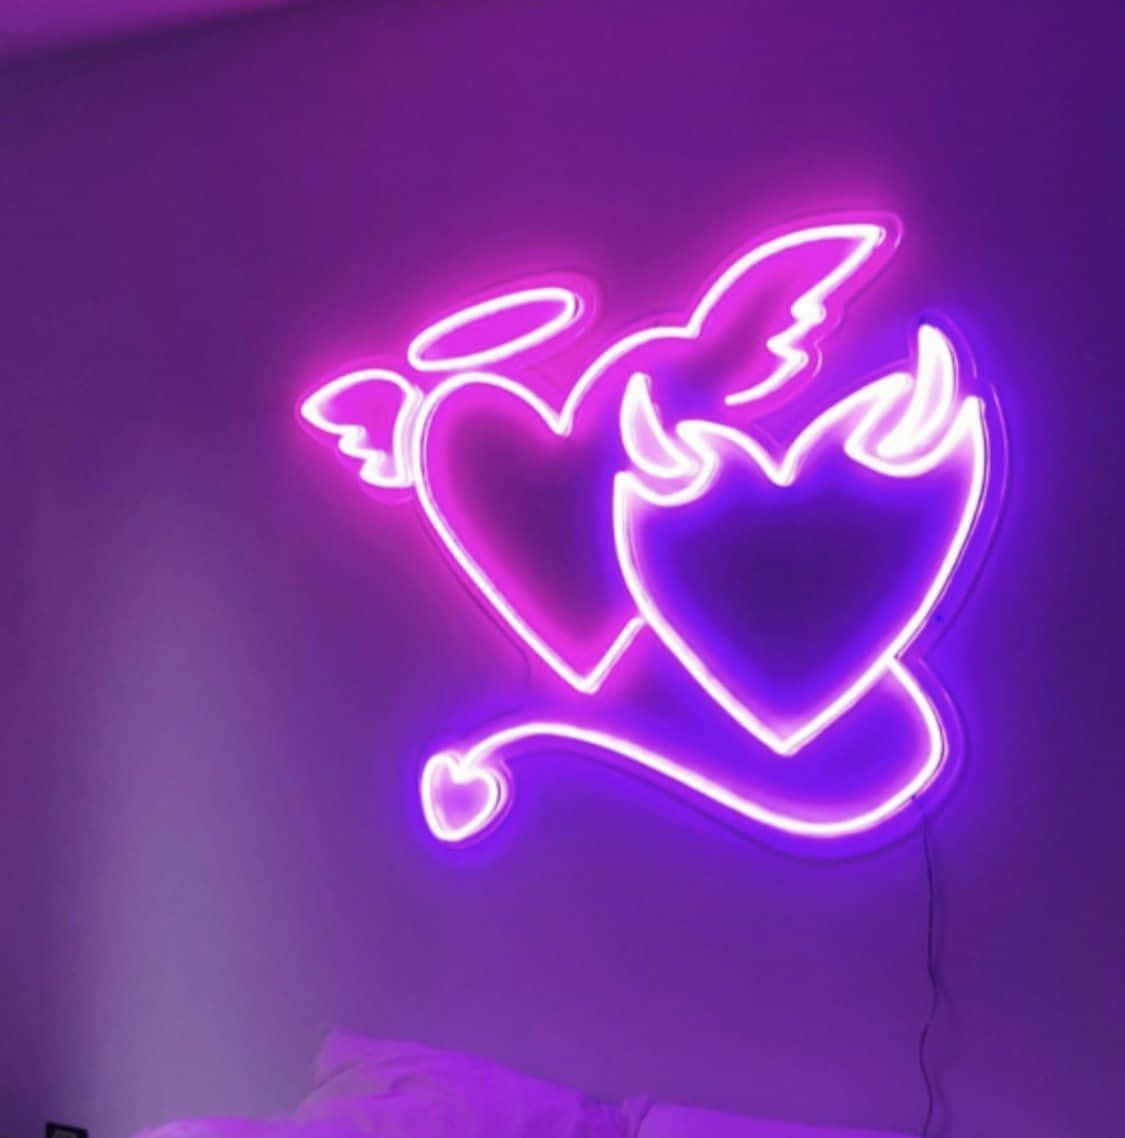 Illuminate your life and your style with Neon Aesthetics